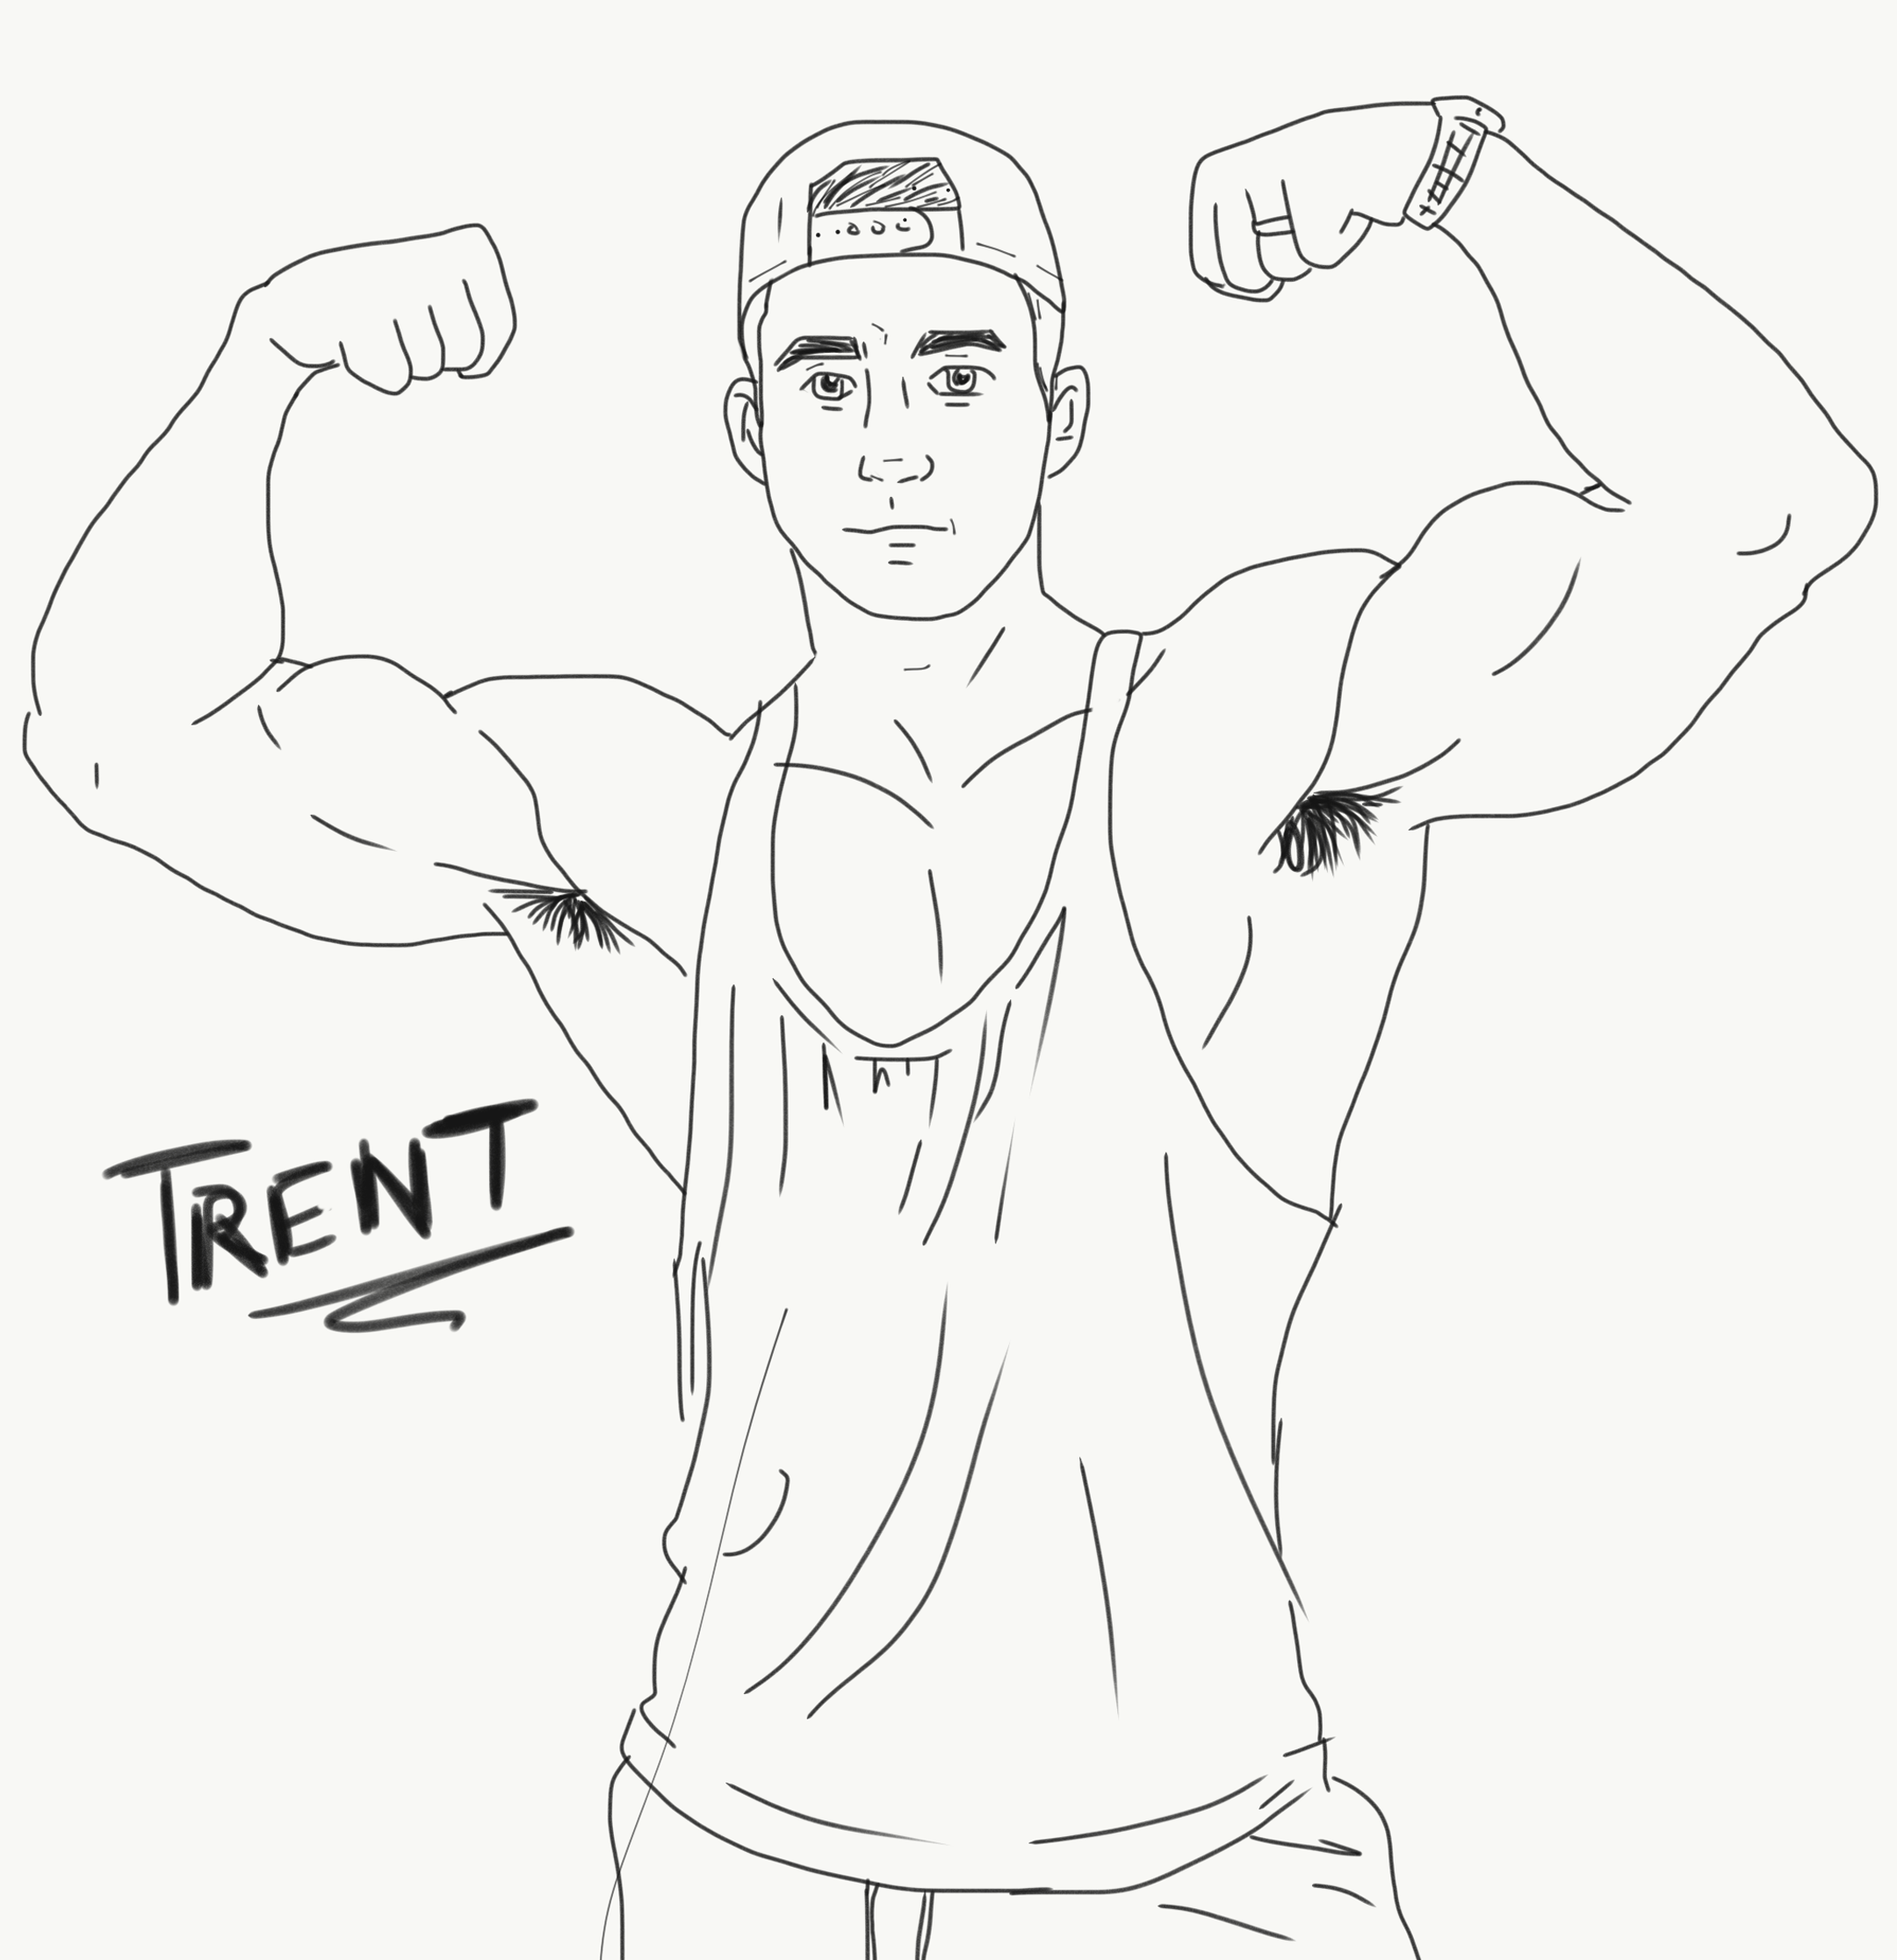 Trent. Image by thenewtfartist